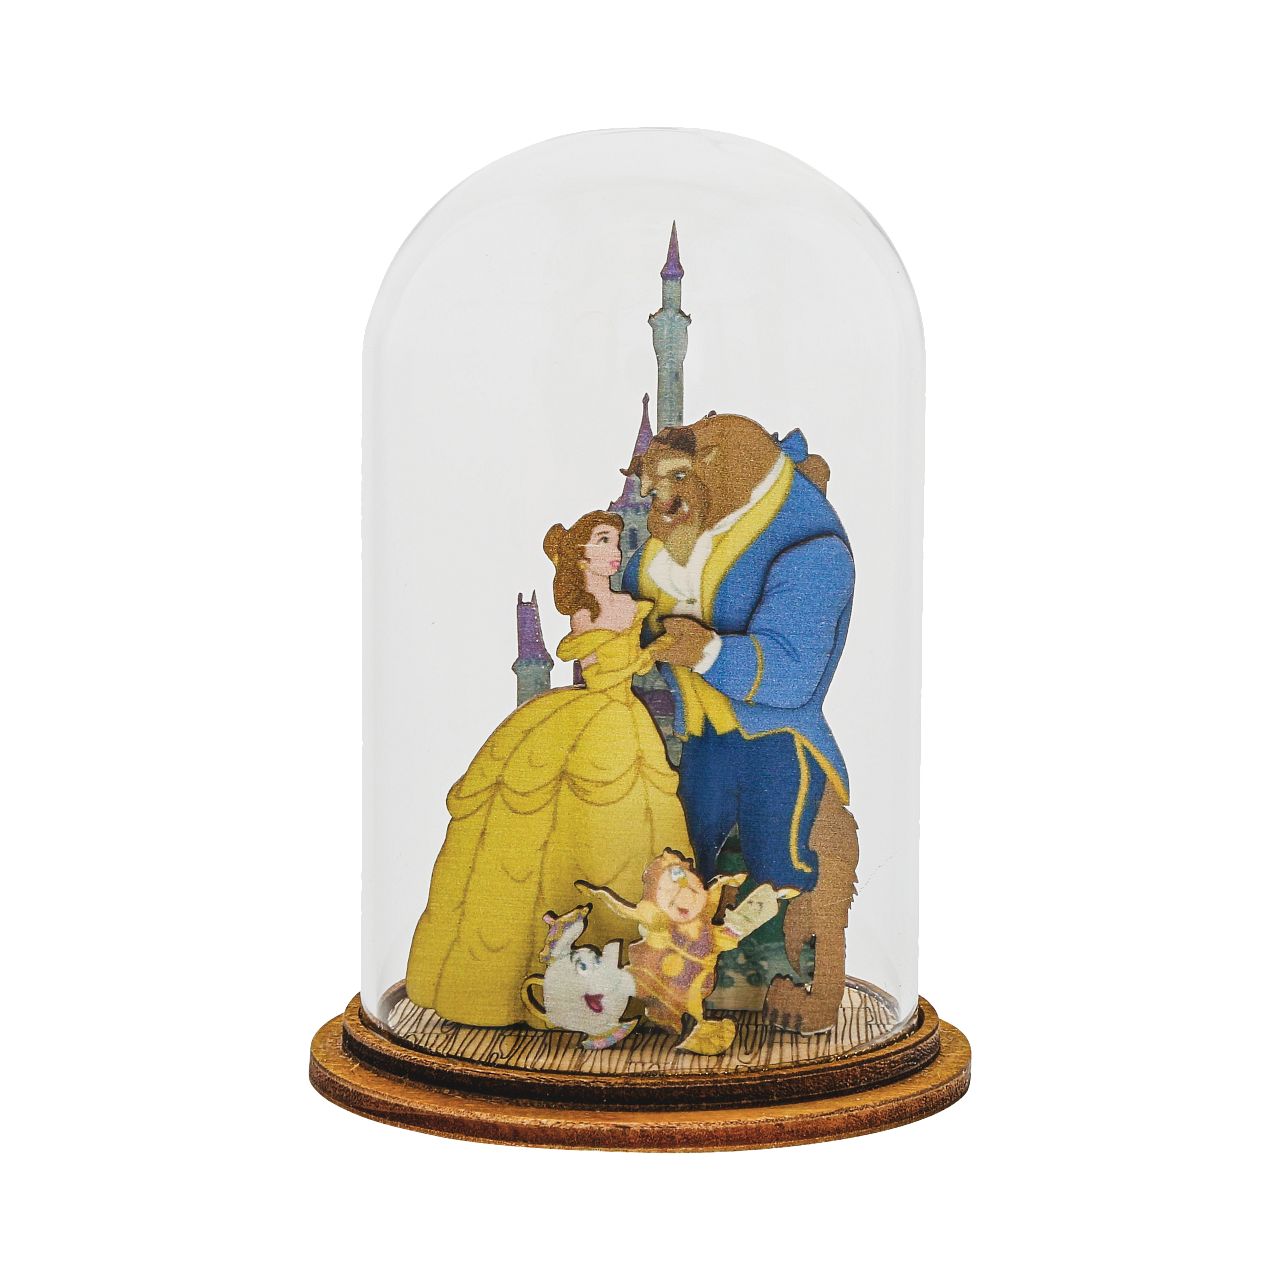 Enchanted Beauty - Beauty and the Beast Figurine  Cogsworth, Lumier and Mrs Potts all join in the celebration with Belle and the Beast in this enchanted figurine. This classic Beauty and the Beast style, decorative Kloche will make a stunning display in your home.